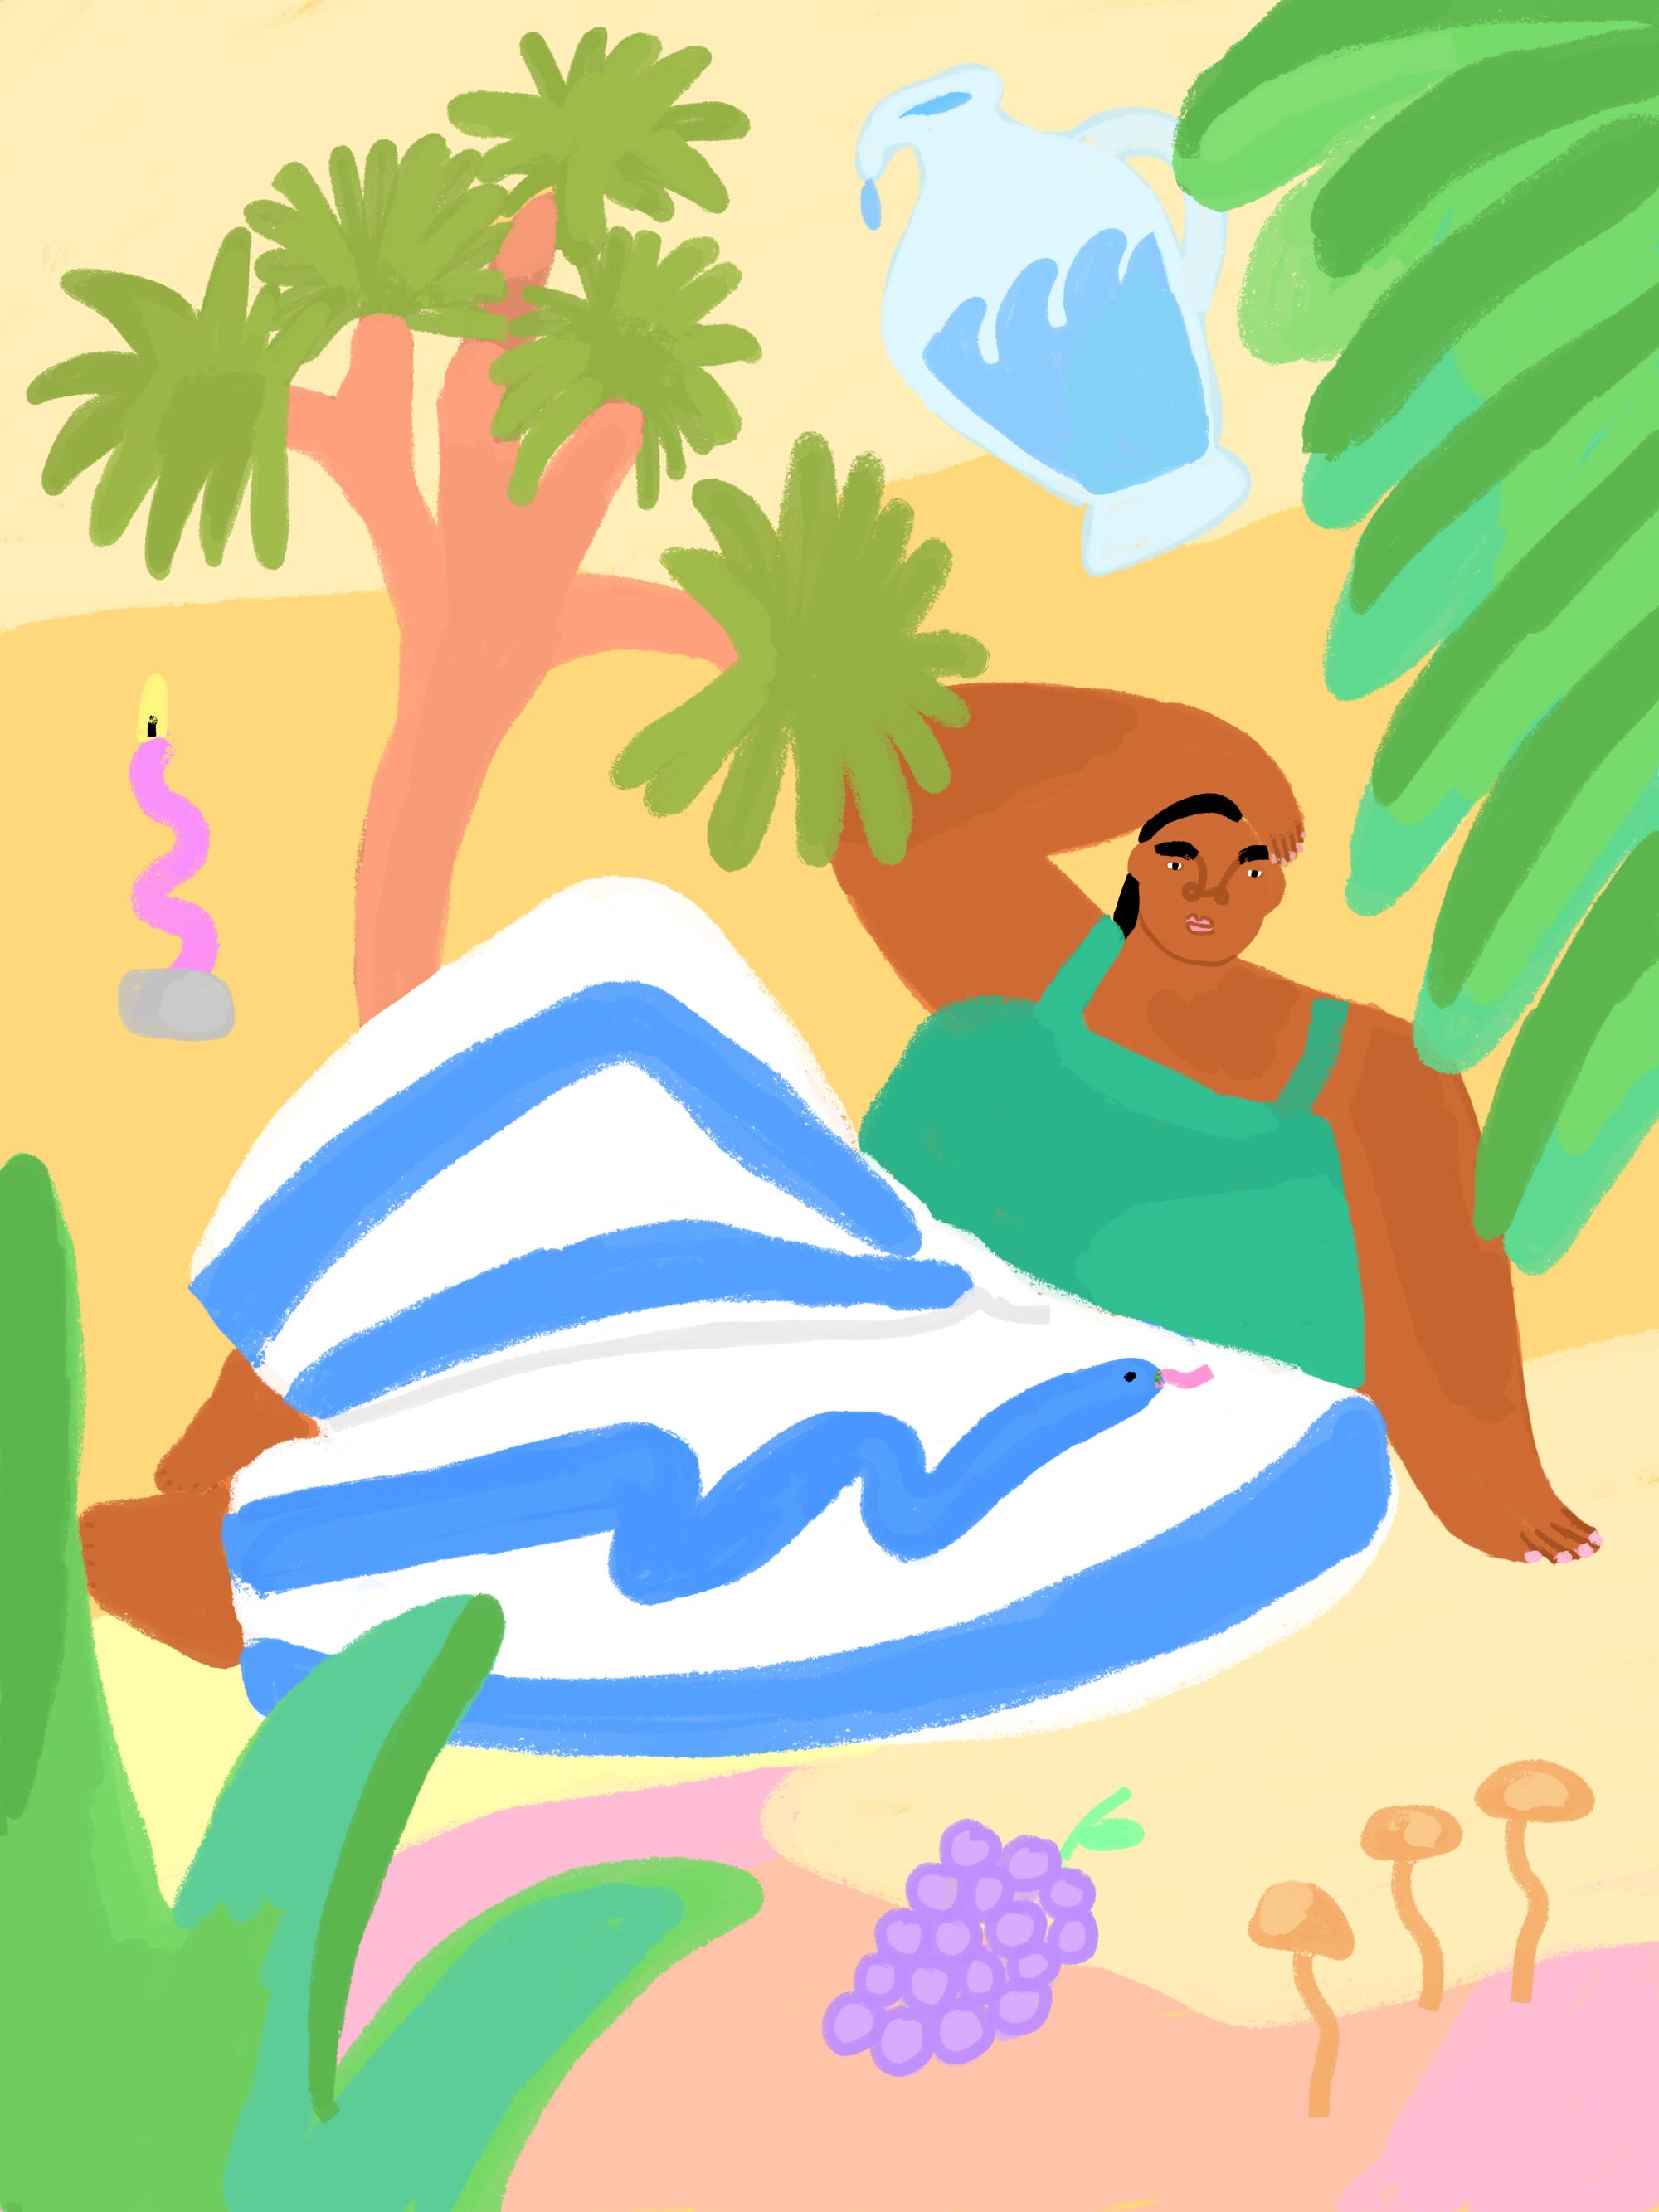 An illustration shows a woman sitting on the ground in the desert, next to a Joshua tree.